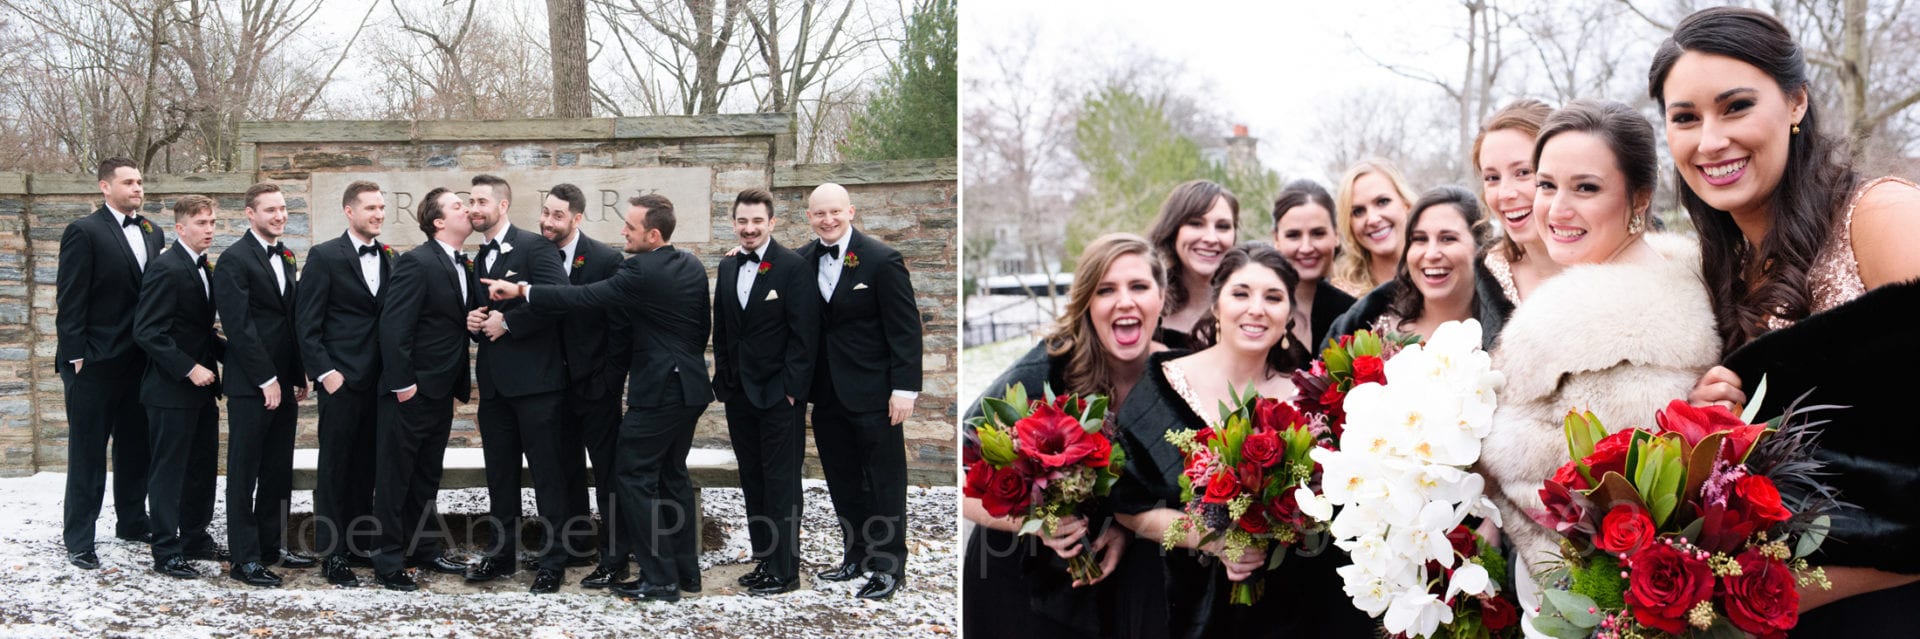 Fun group photos of wedding parties. On the right a large group of black tuxedoed groomsmen gather around the groom. One of the groomsmen kisses the groom on the cheek. In the other photo a group of black-dressed bridesmaids holding red rose bouquets gather around a bride holding a bouquet of white flowers.